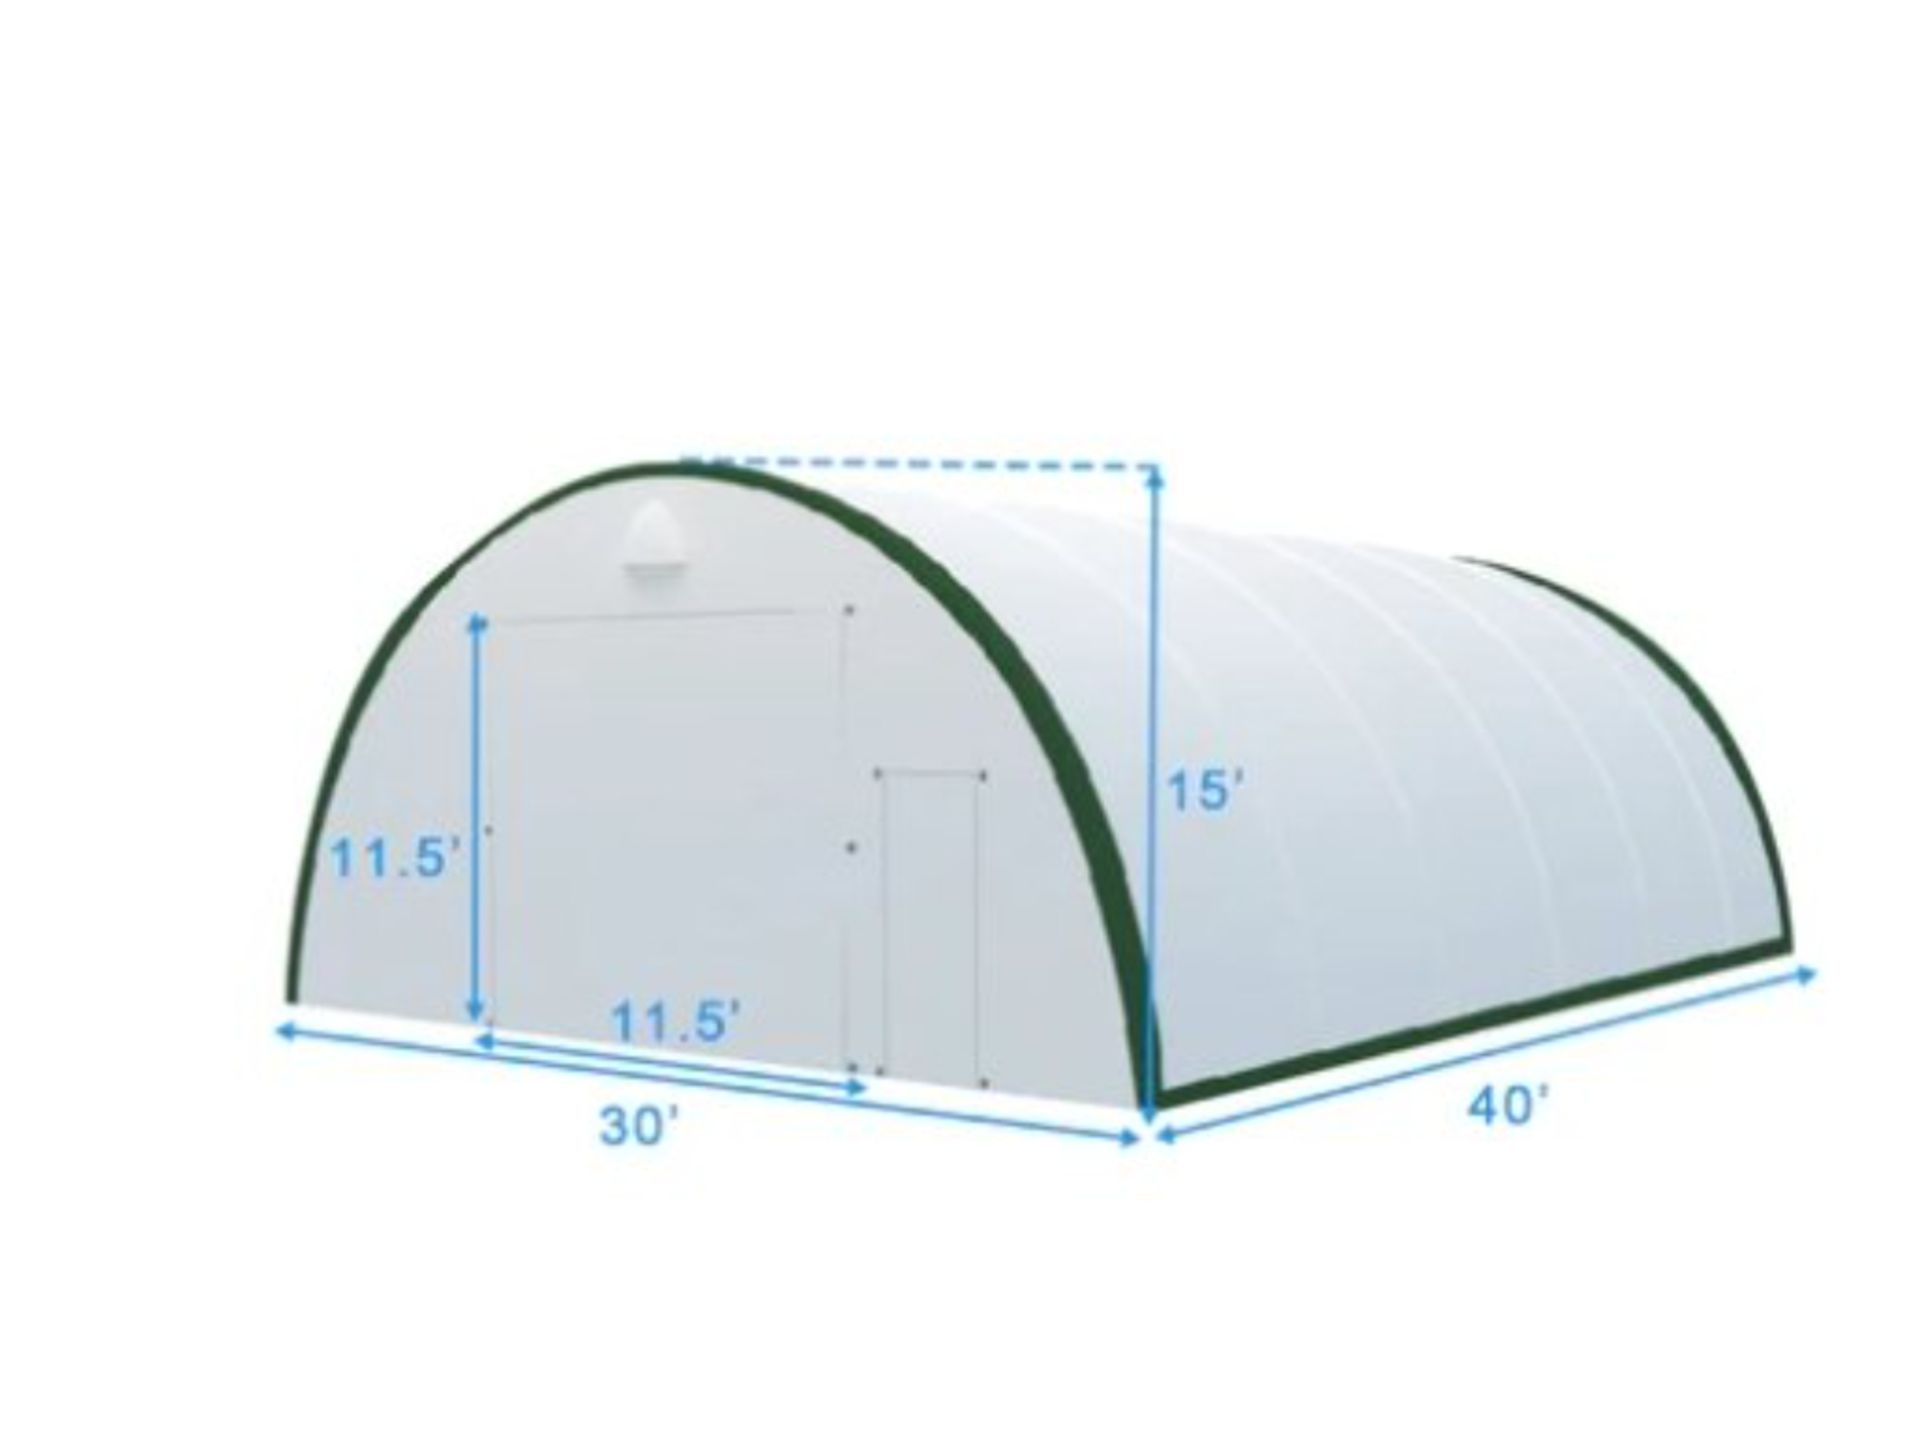 30' x 40' x 15 Dome Shelter - Image 2 of 8